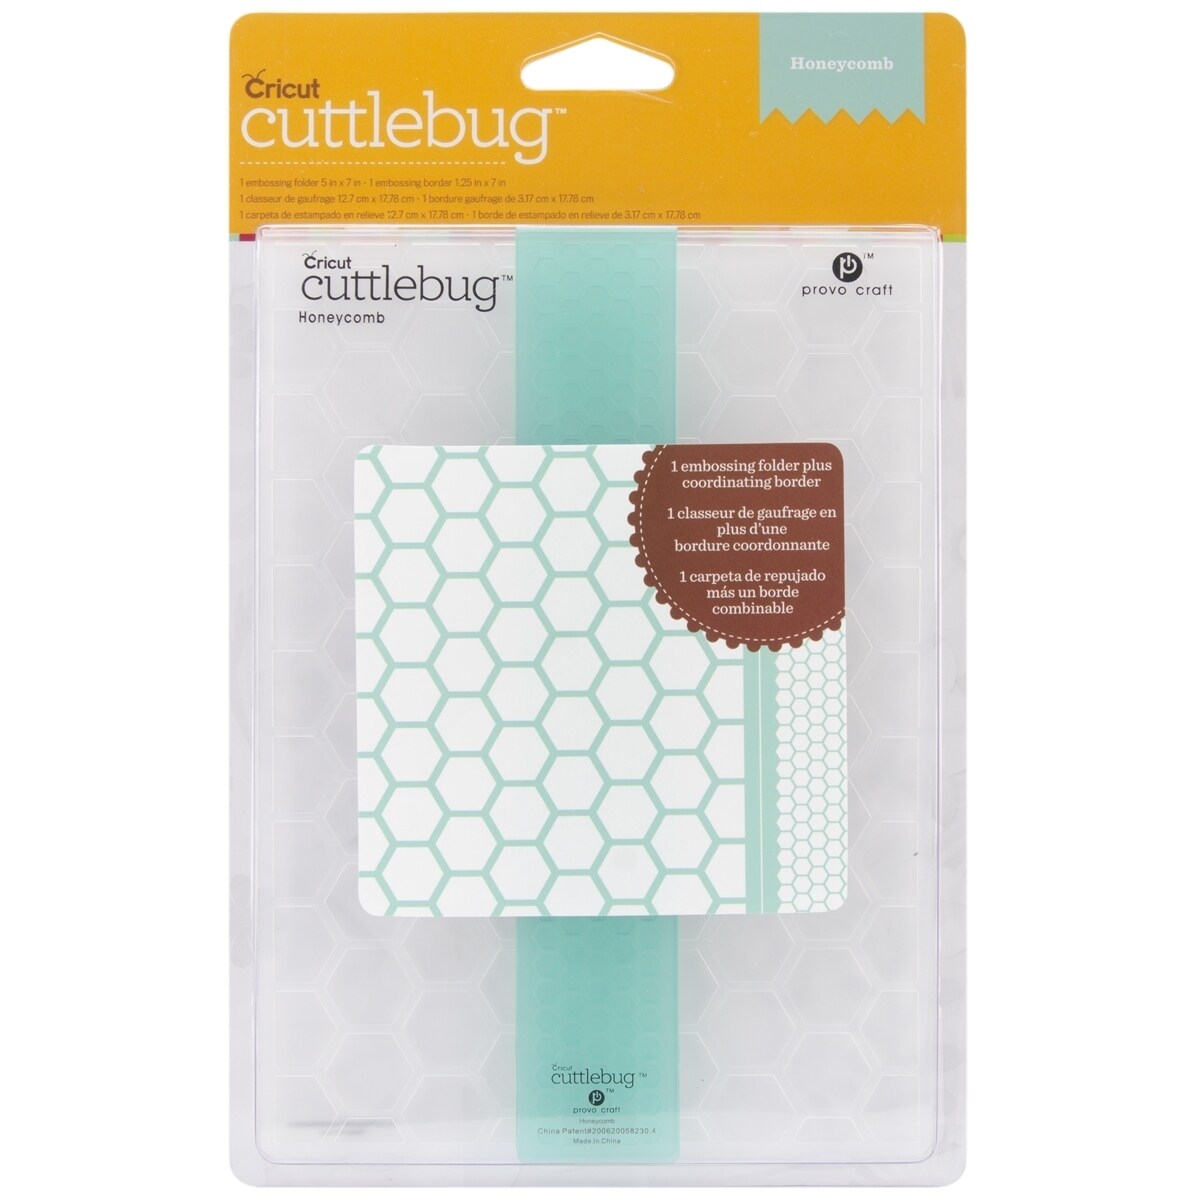 Cricut Cuttlebug Embossing Folders New in Packaging Timeless and  Sentimentals 8 Total Folder Plates 